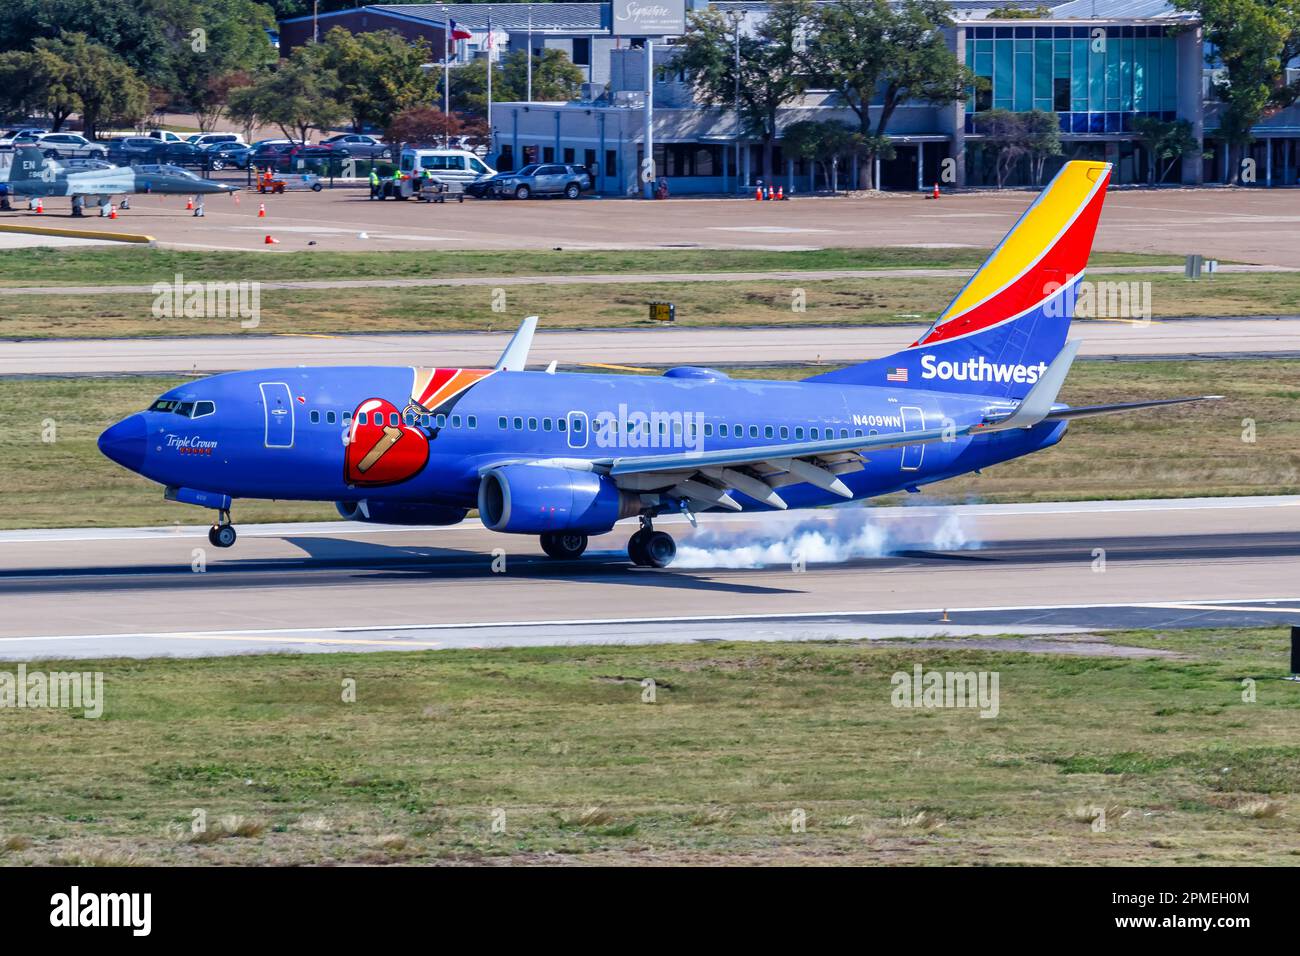 Dallas, United States – November 12, 2022: Southwest Boeing 737-700 airplane in the Triple Crown special livery at Dallas Love Field airport (DAL) in Stock Photo